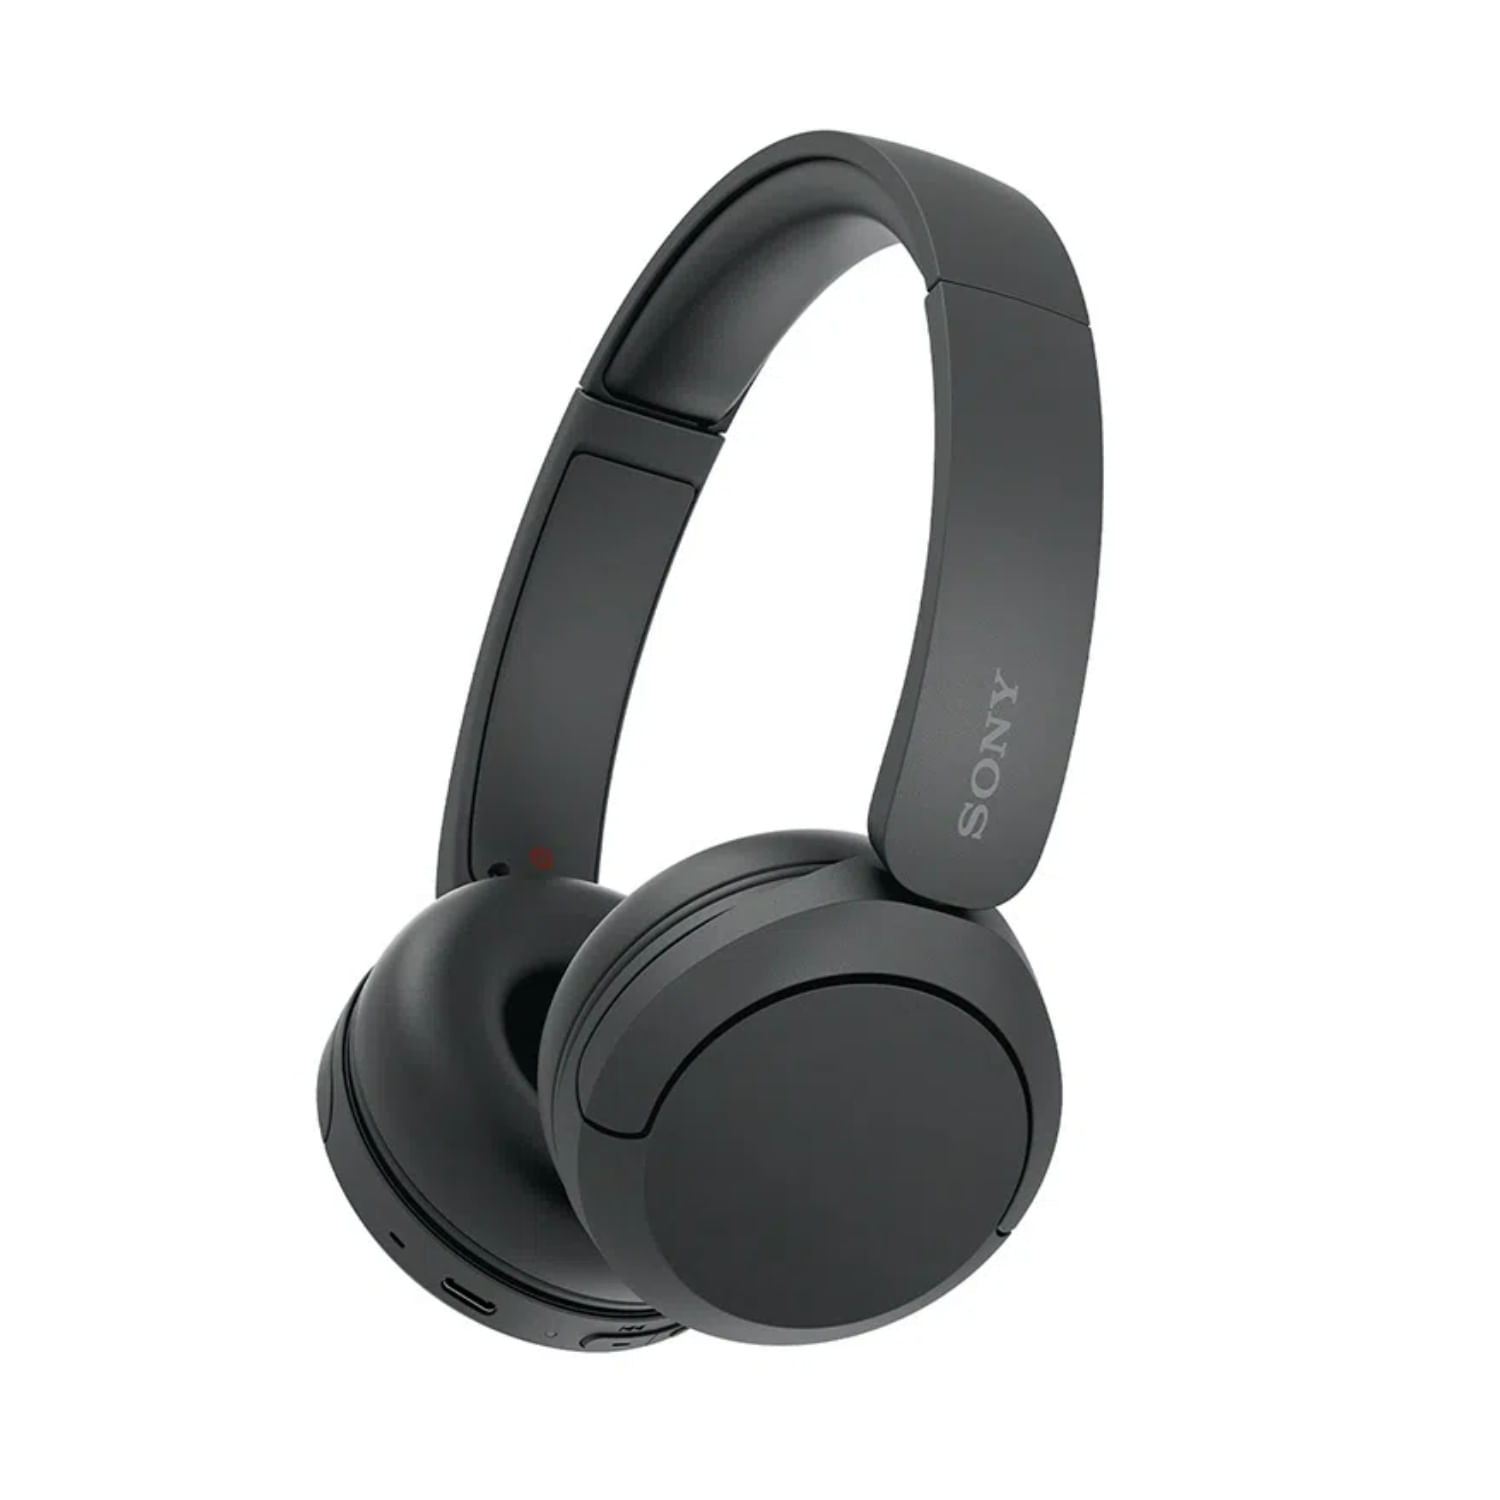 Audifonos Bluetooth On ear Sony WH-CH520 50 Hrs Negro